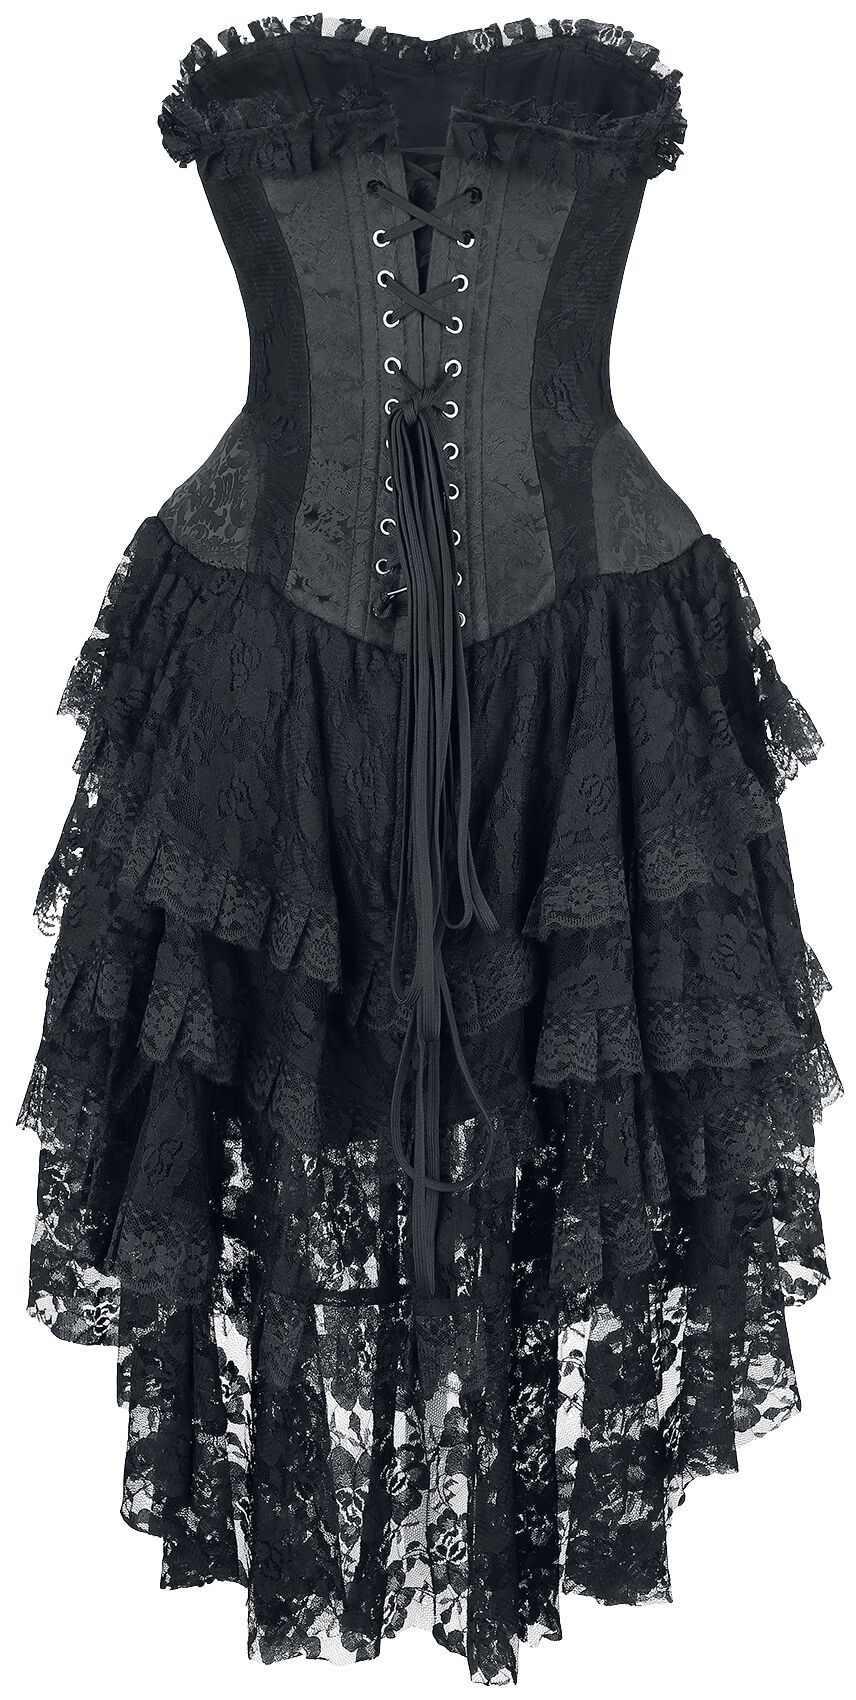 Elaborate Gothic Dress with Corset and Shorter-Front Skirt | Gothicana ...